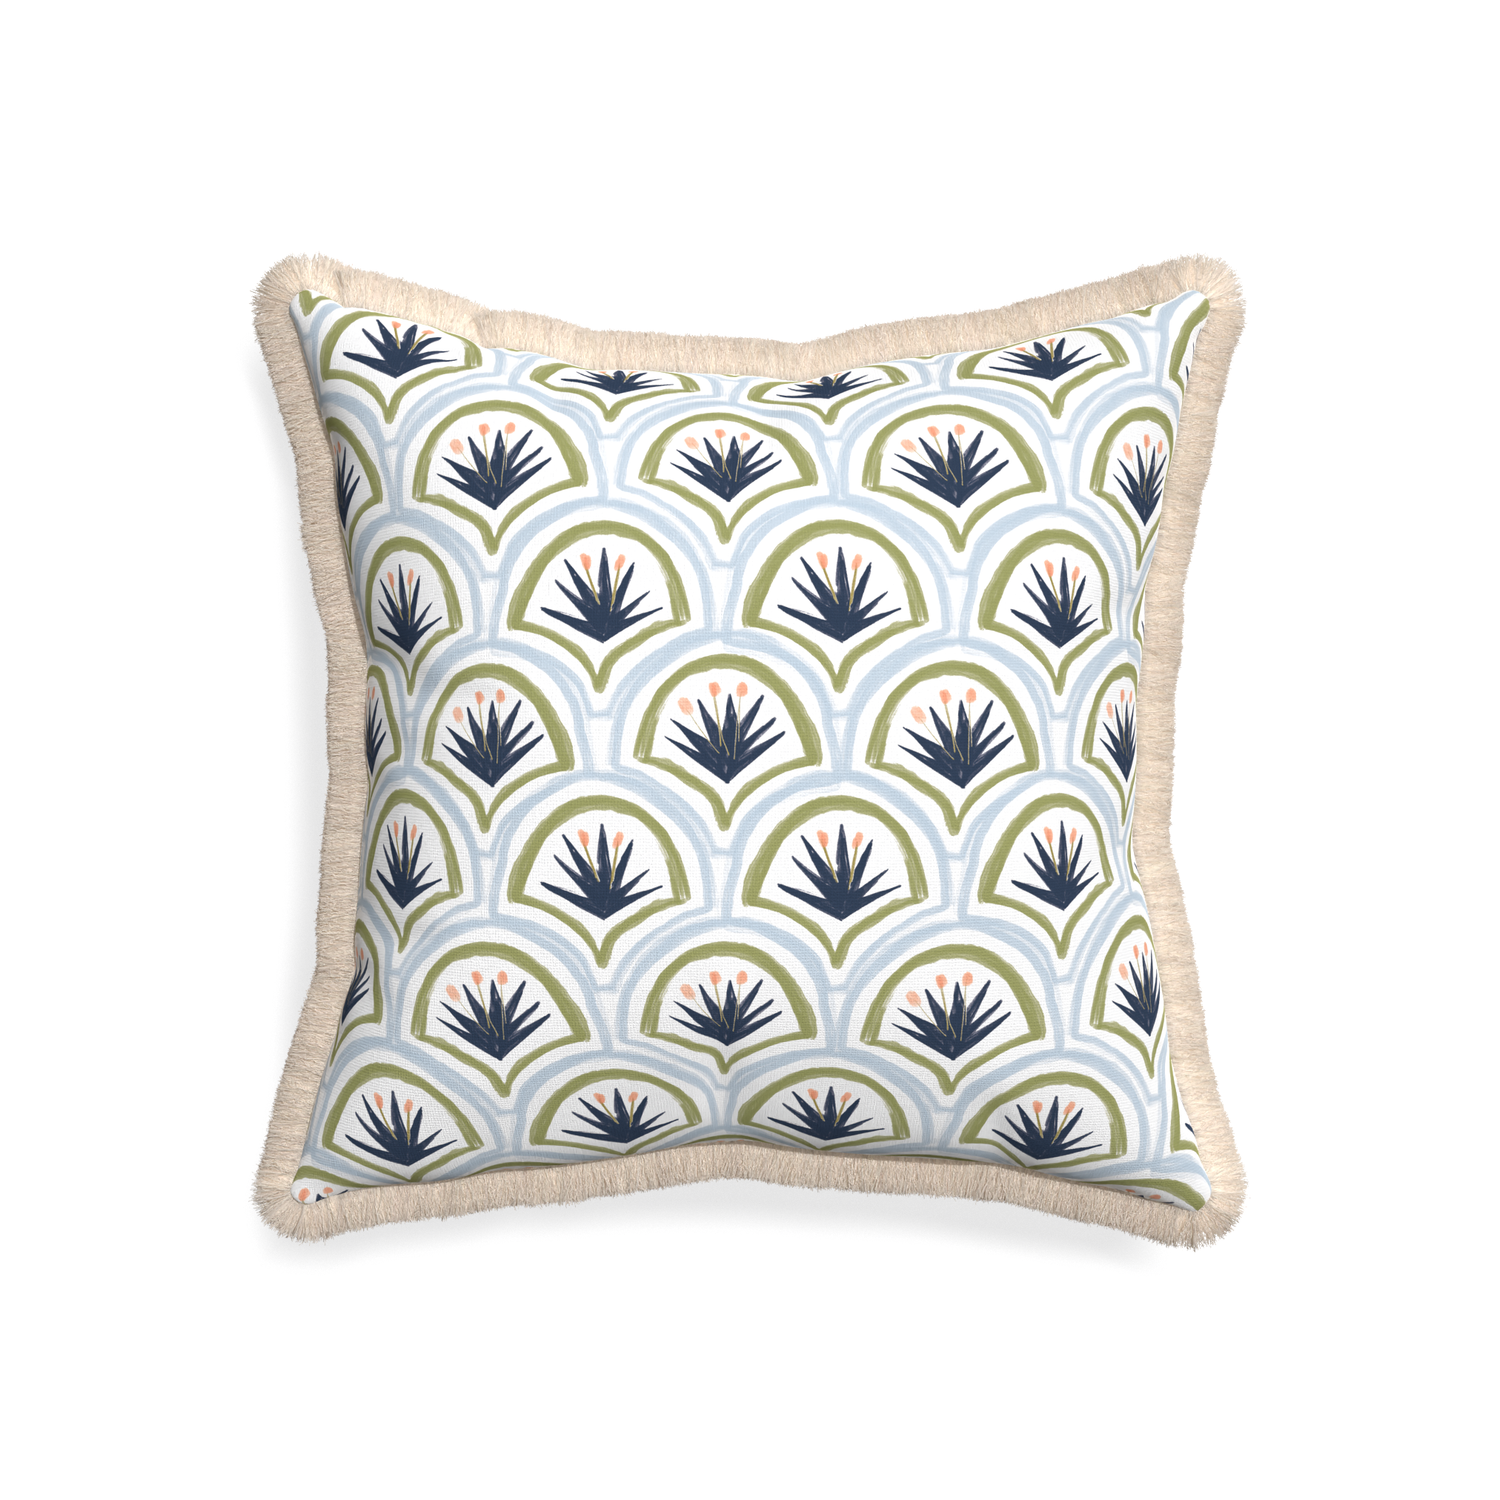 20-square thatcher midnight custom art deco palm patternpillow with cream fringe on white background